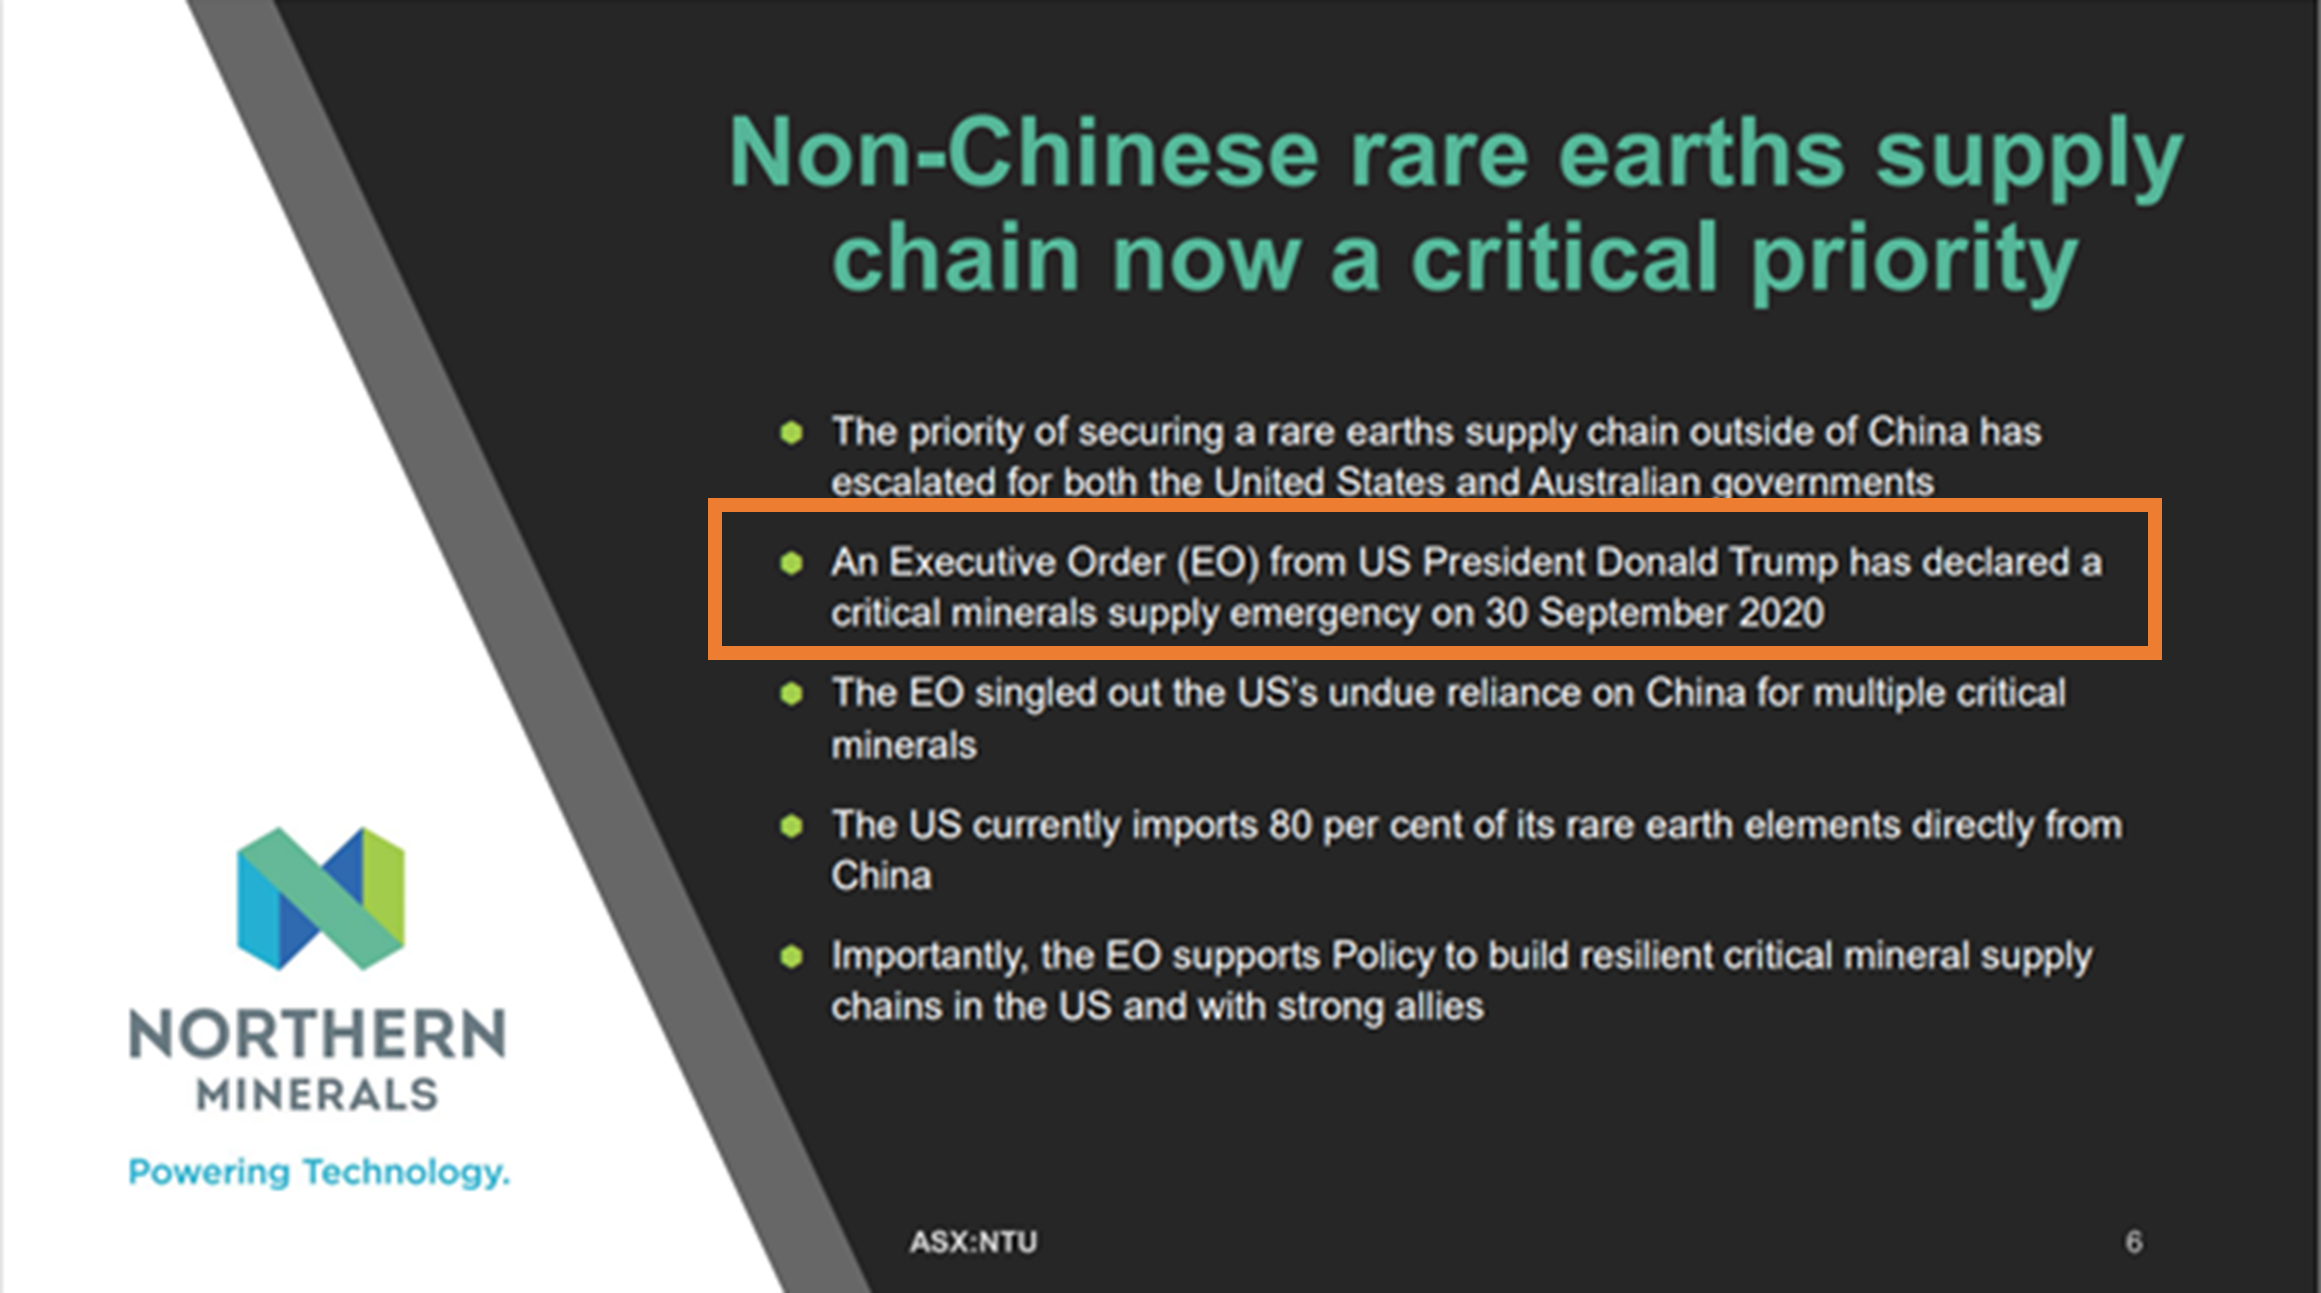 Slide from Northern Minerals presentation to the Goldman Sachs Rare Earth Forum, 2-Dec-2020.